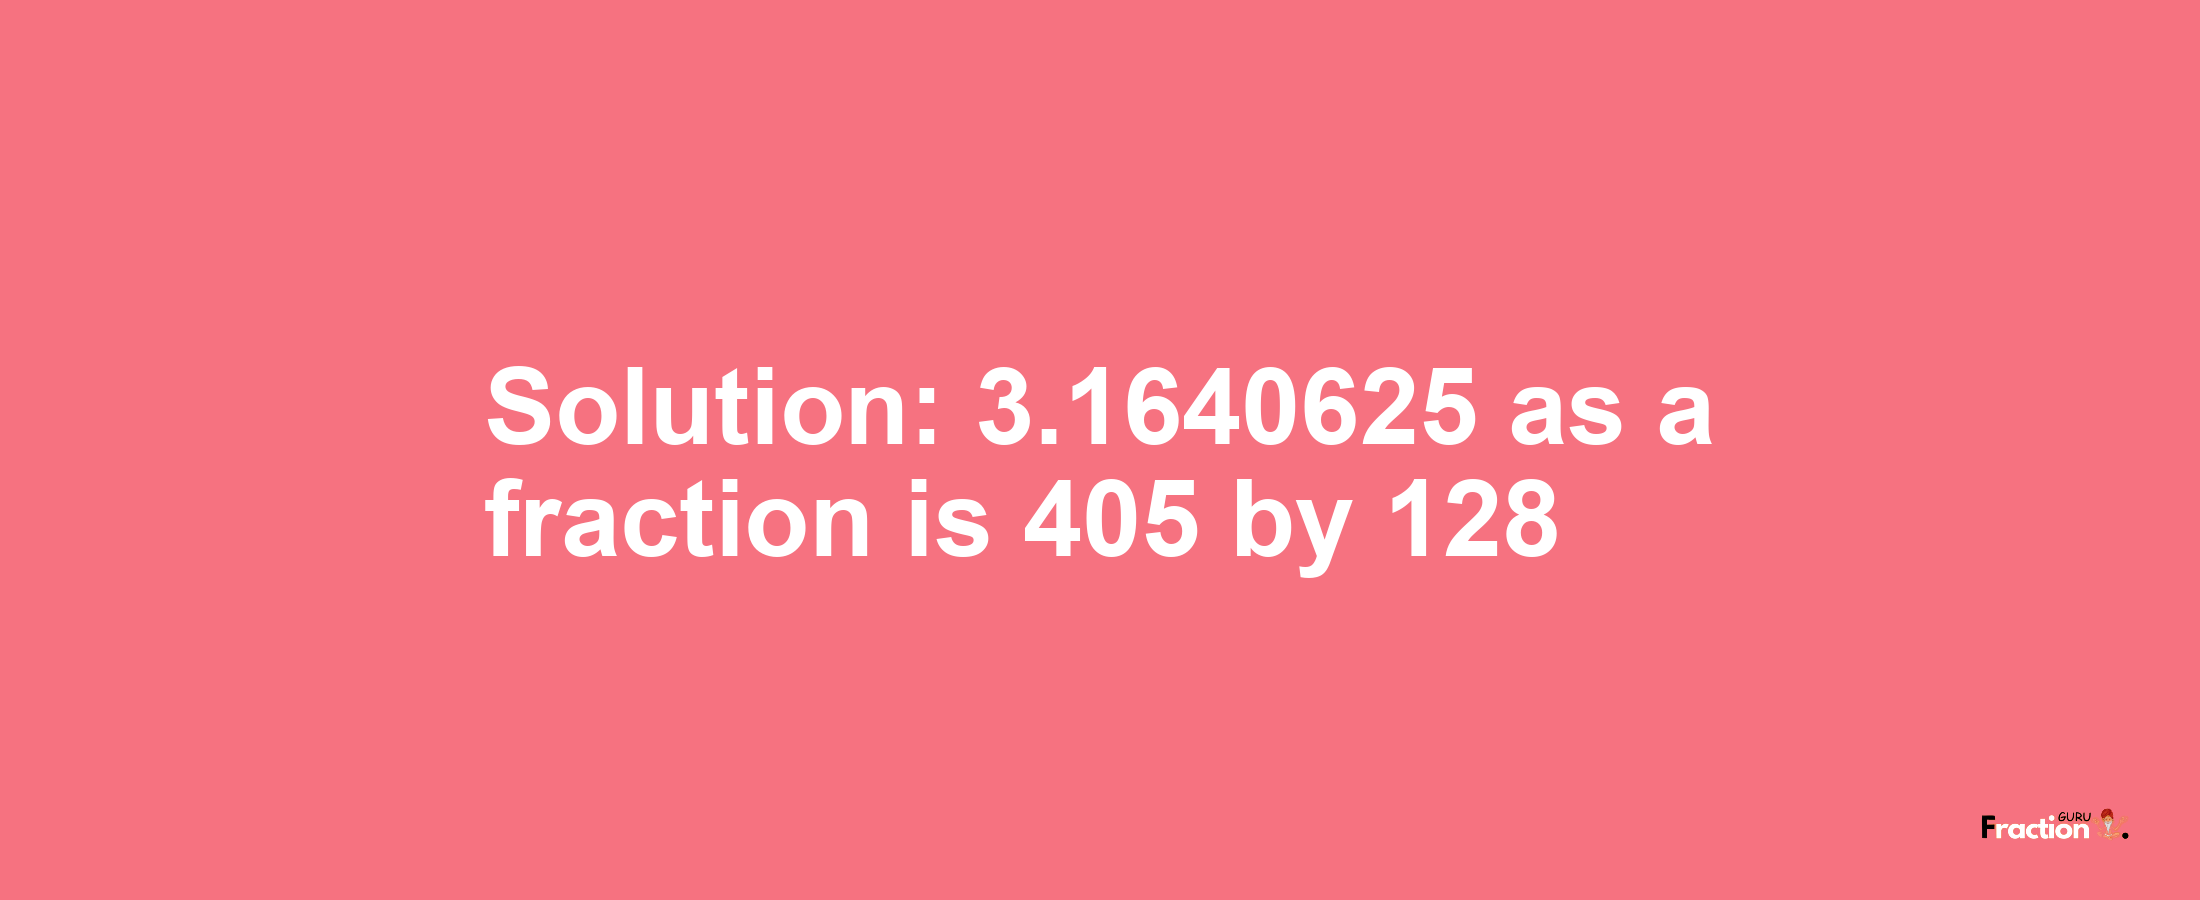 Solution:3.1640625 as a fraction is 405/128